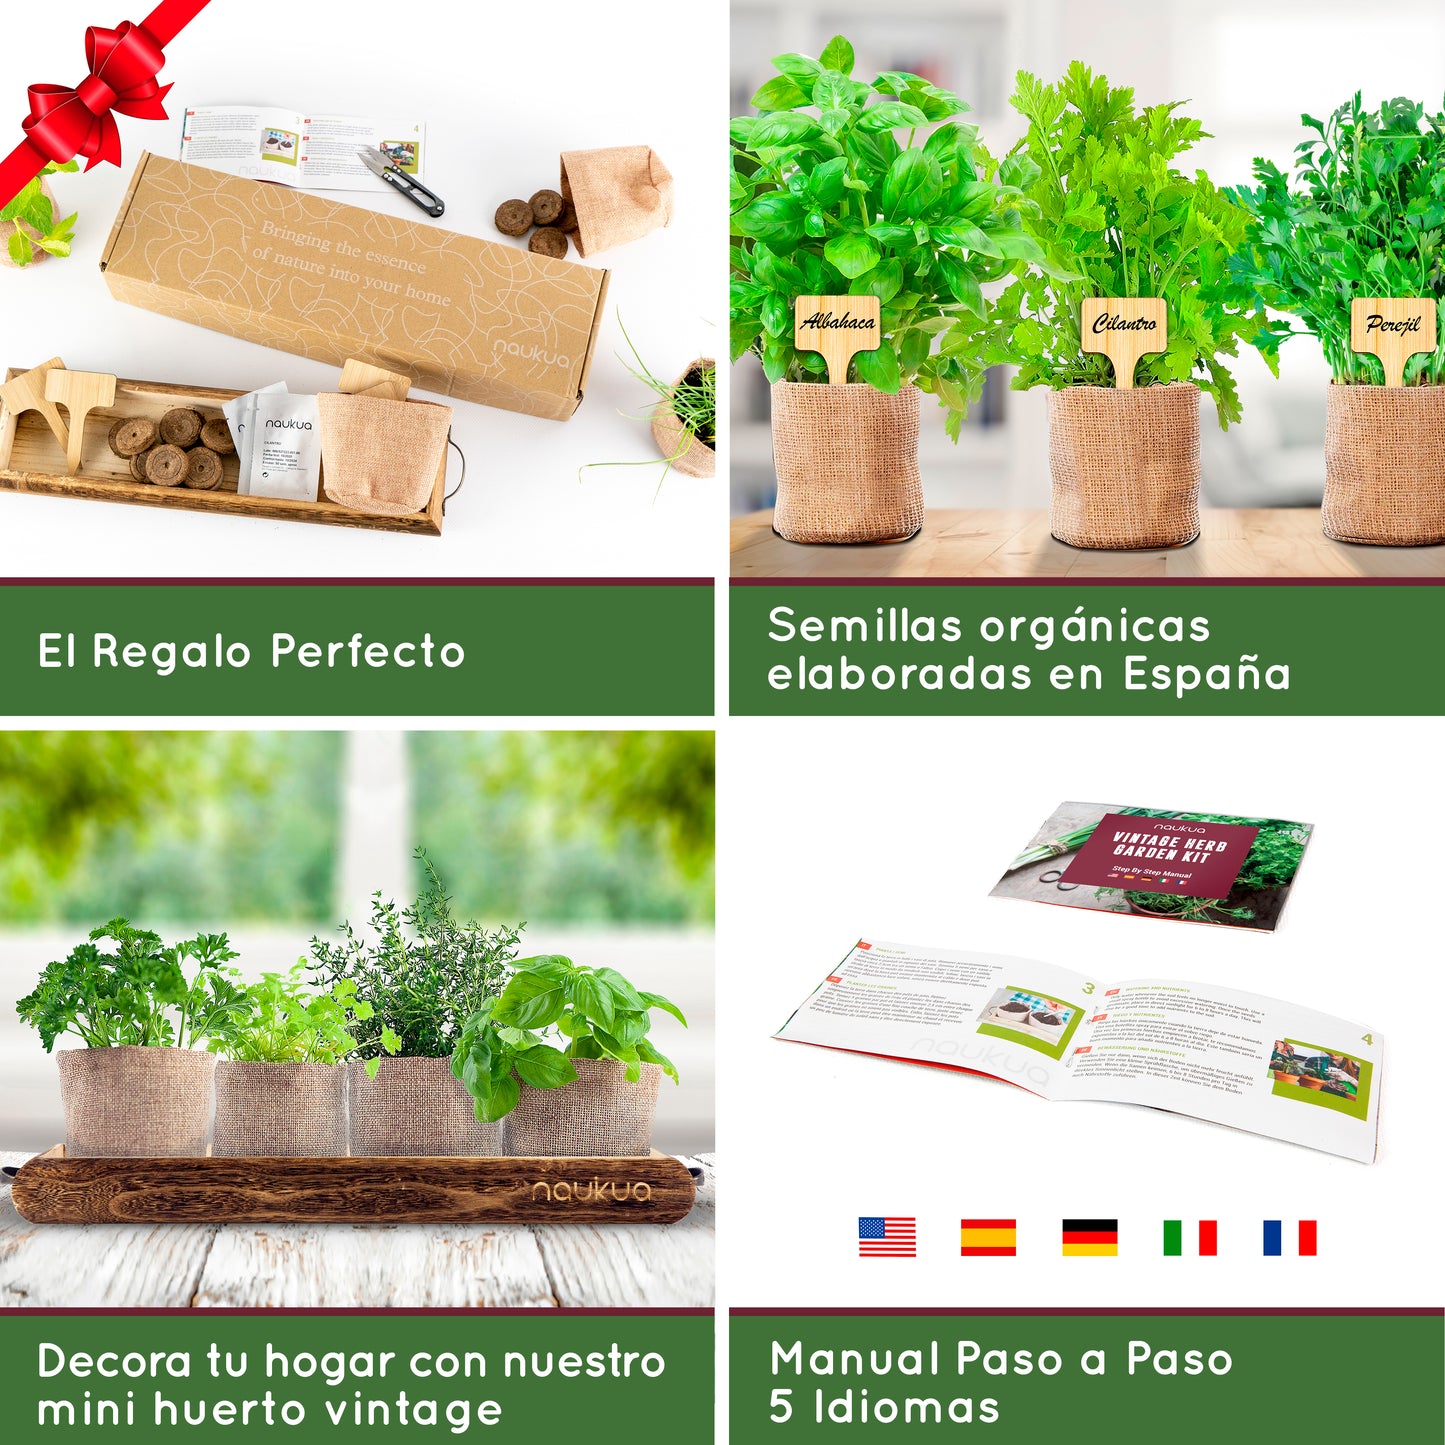 Vintage Urban Garden Grow Kit for Aromatic Herbs (Thyme, Basil, Parsley and Coriander)